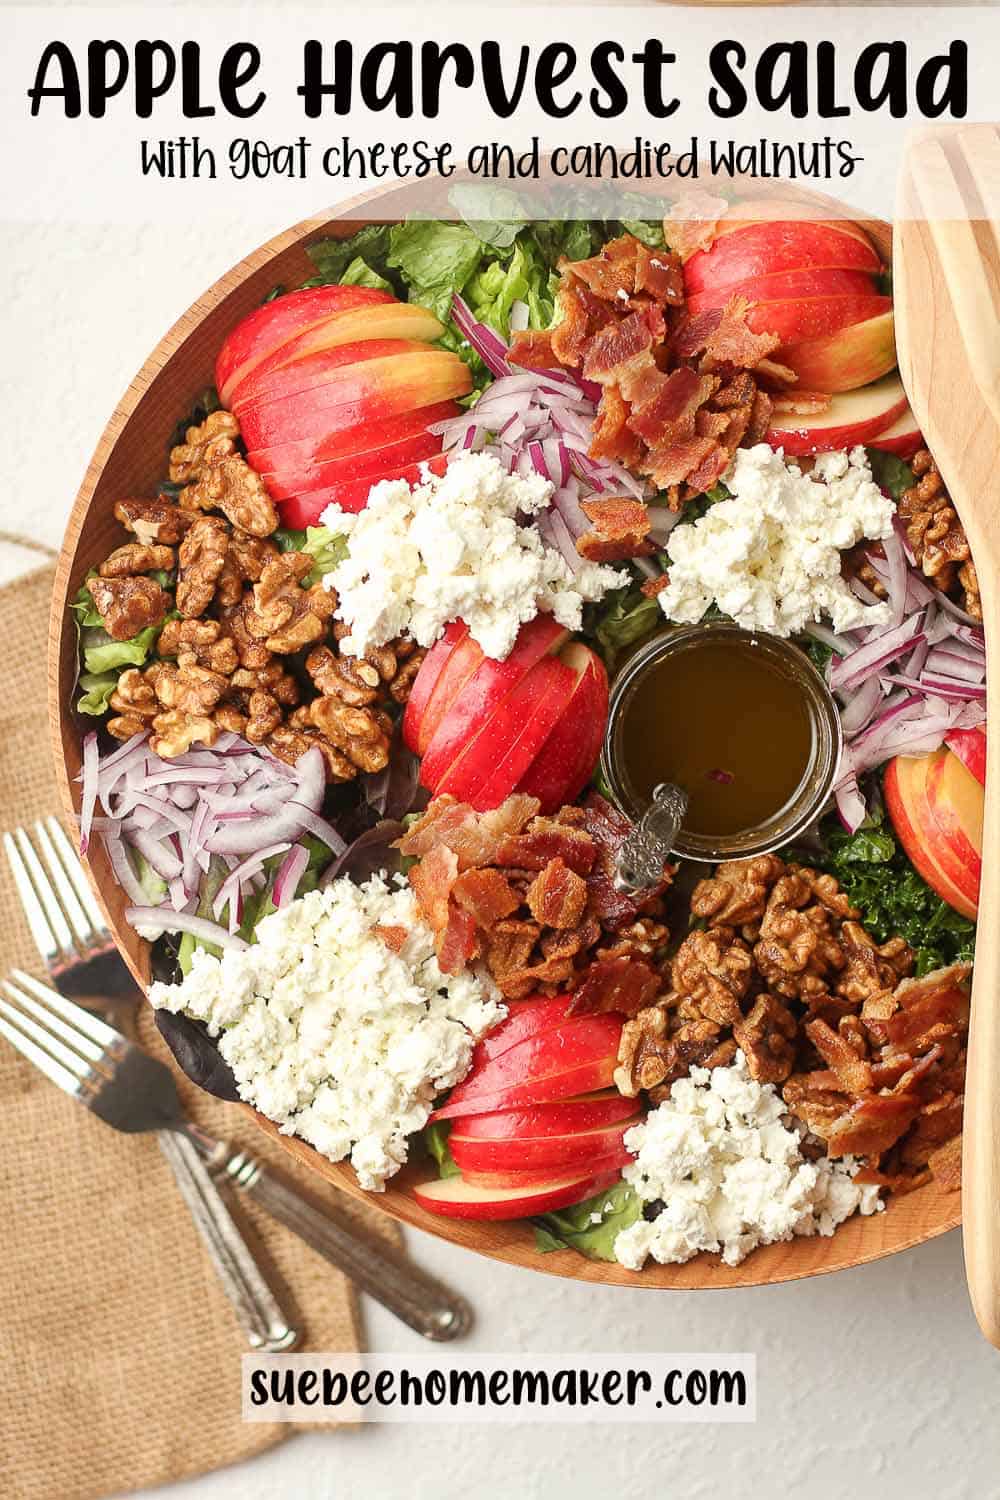 Overhead view of a large apple harvest salad with goat cheese and candied walnuts.